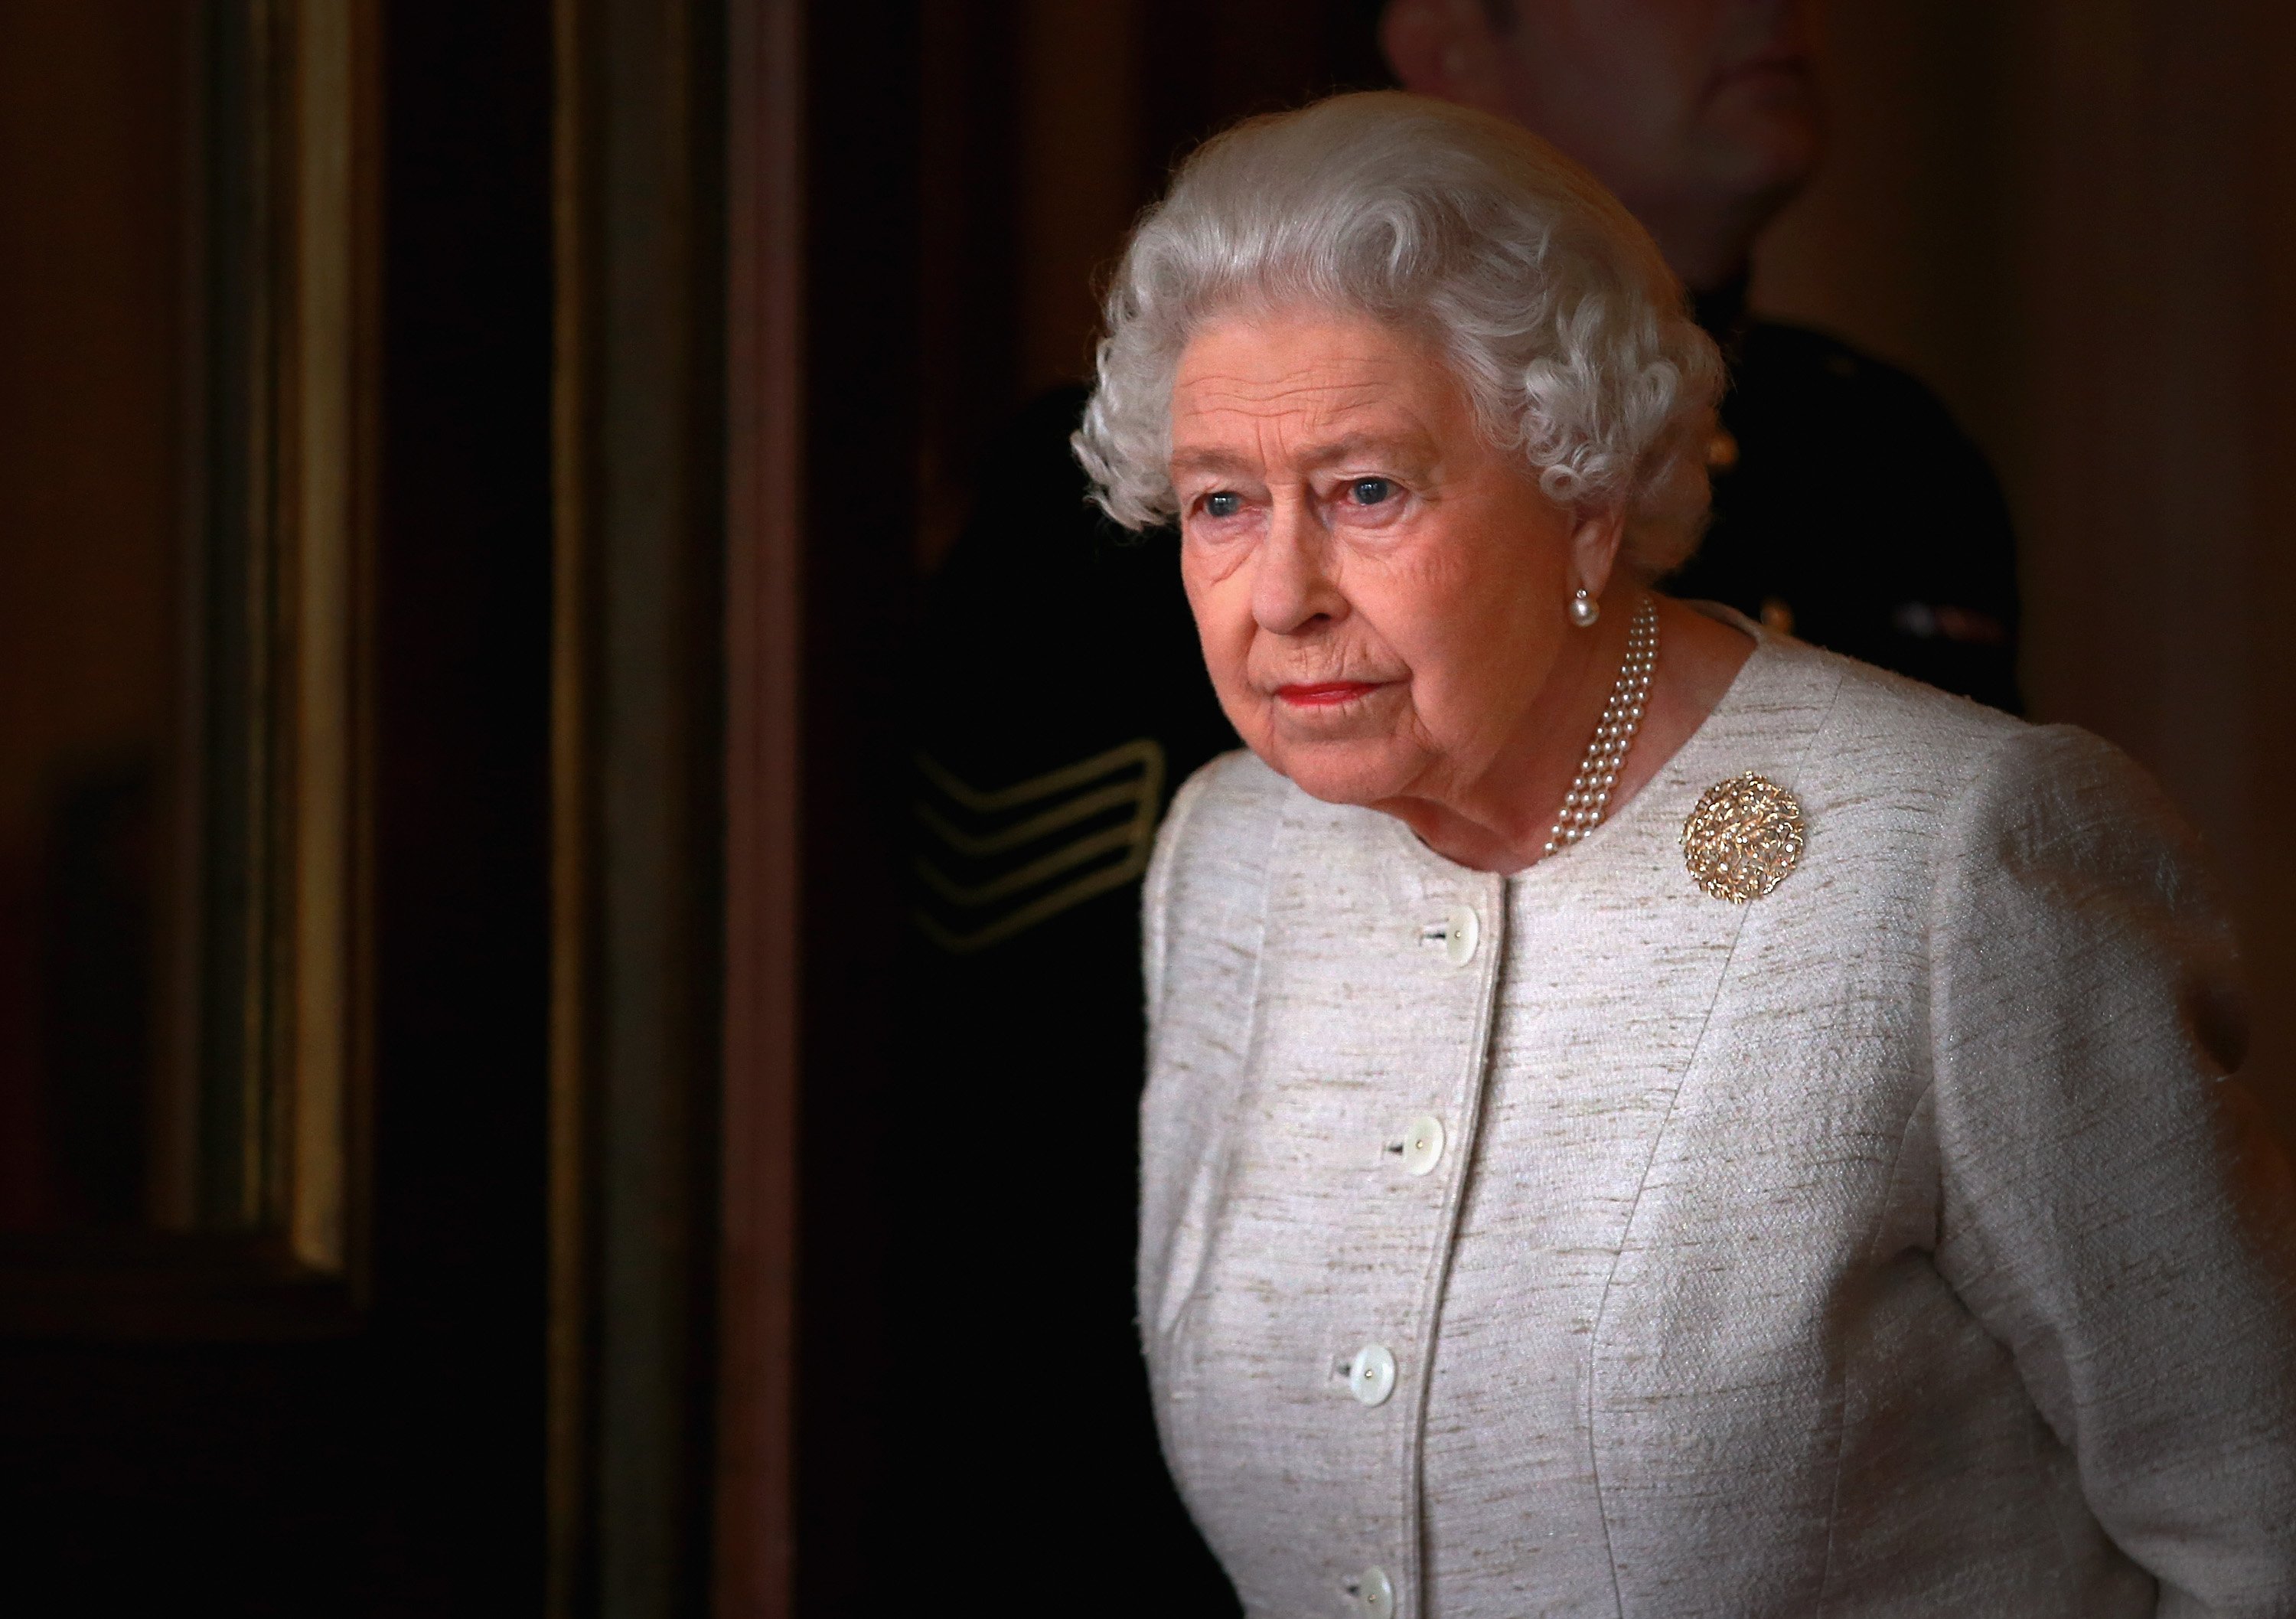 Queen Elizabeth II at Buckingham Palace on November 4, 2015 in London, England. / Source: Getty Images